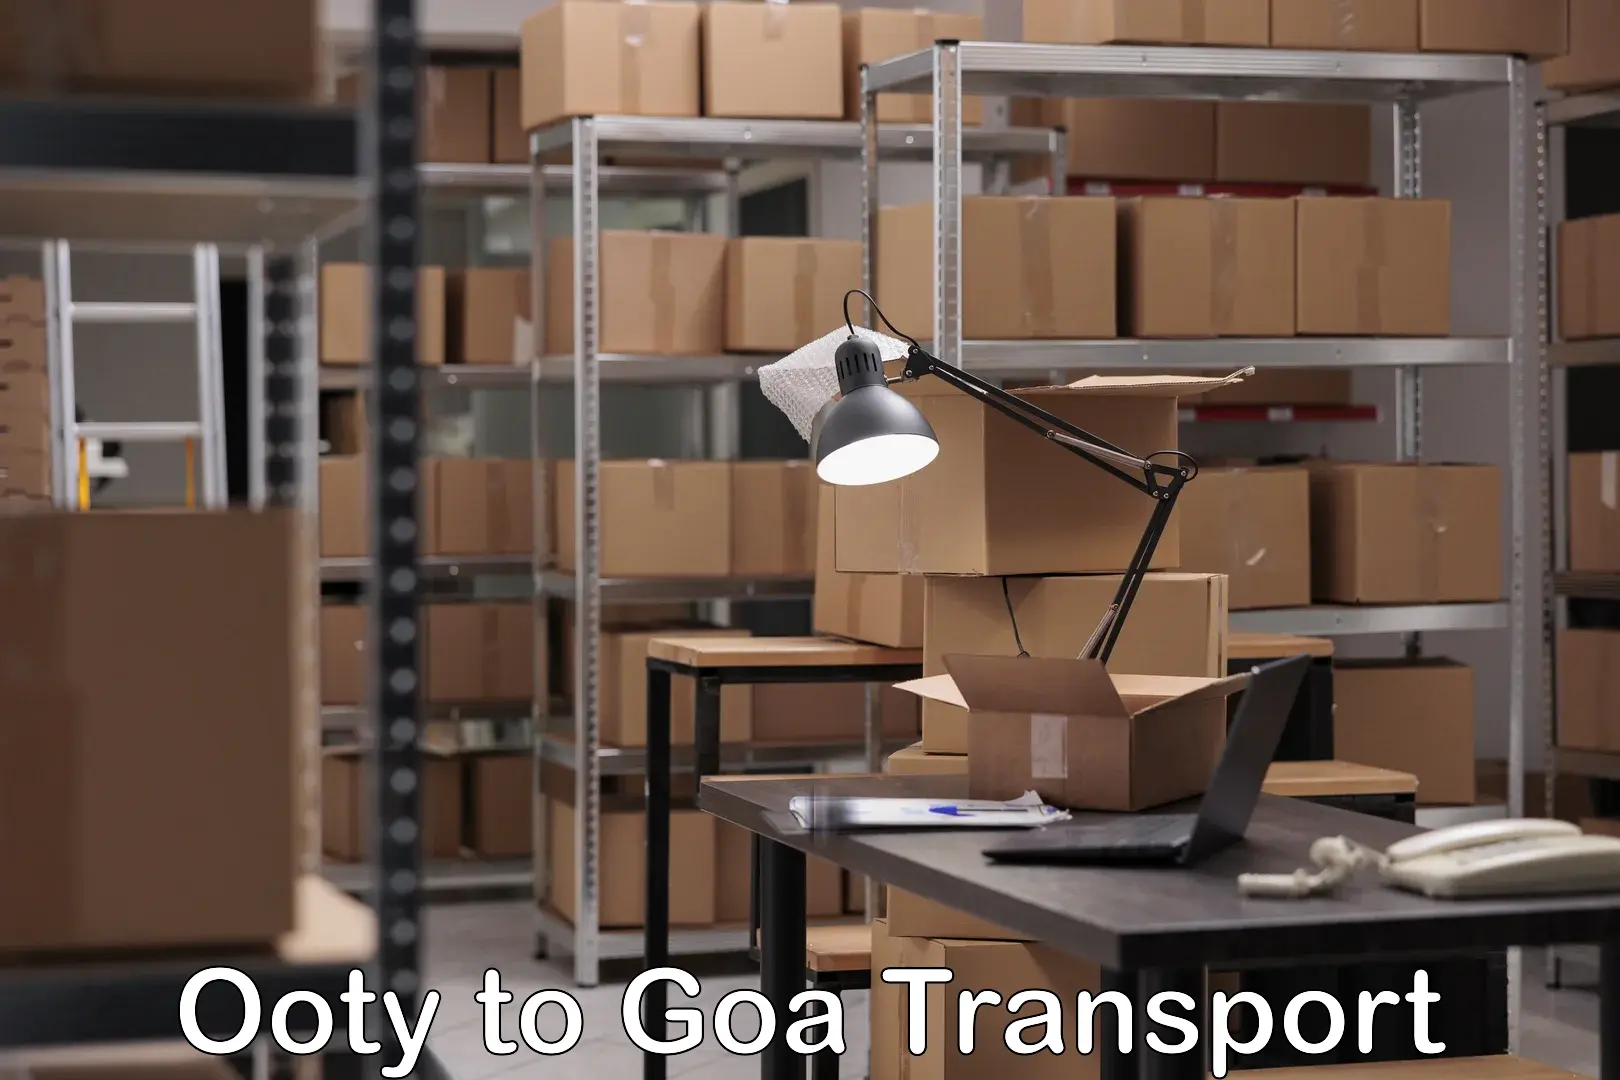 Scooty transport charges Ooty to Goa University